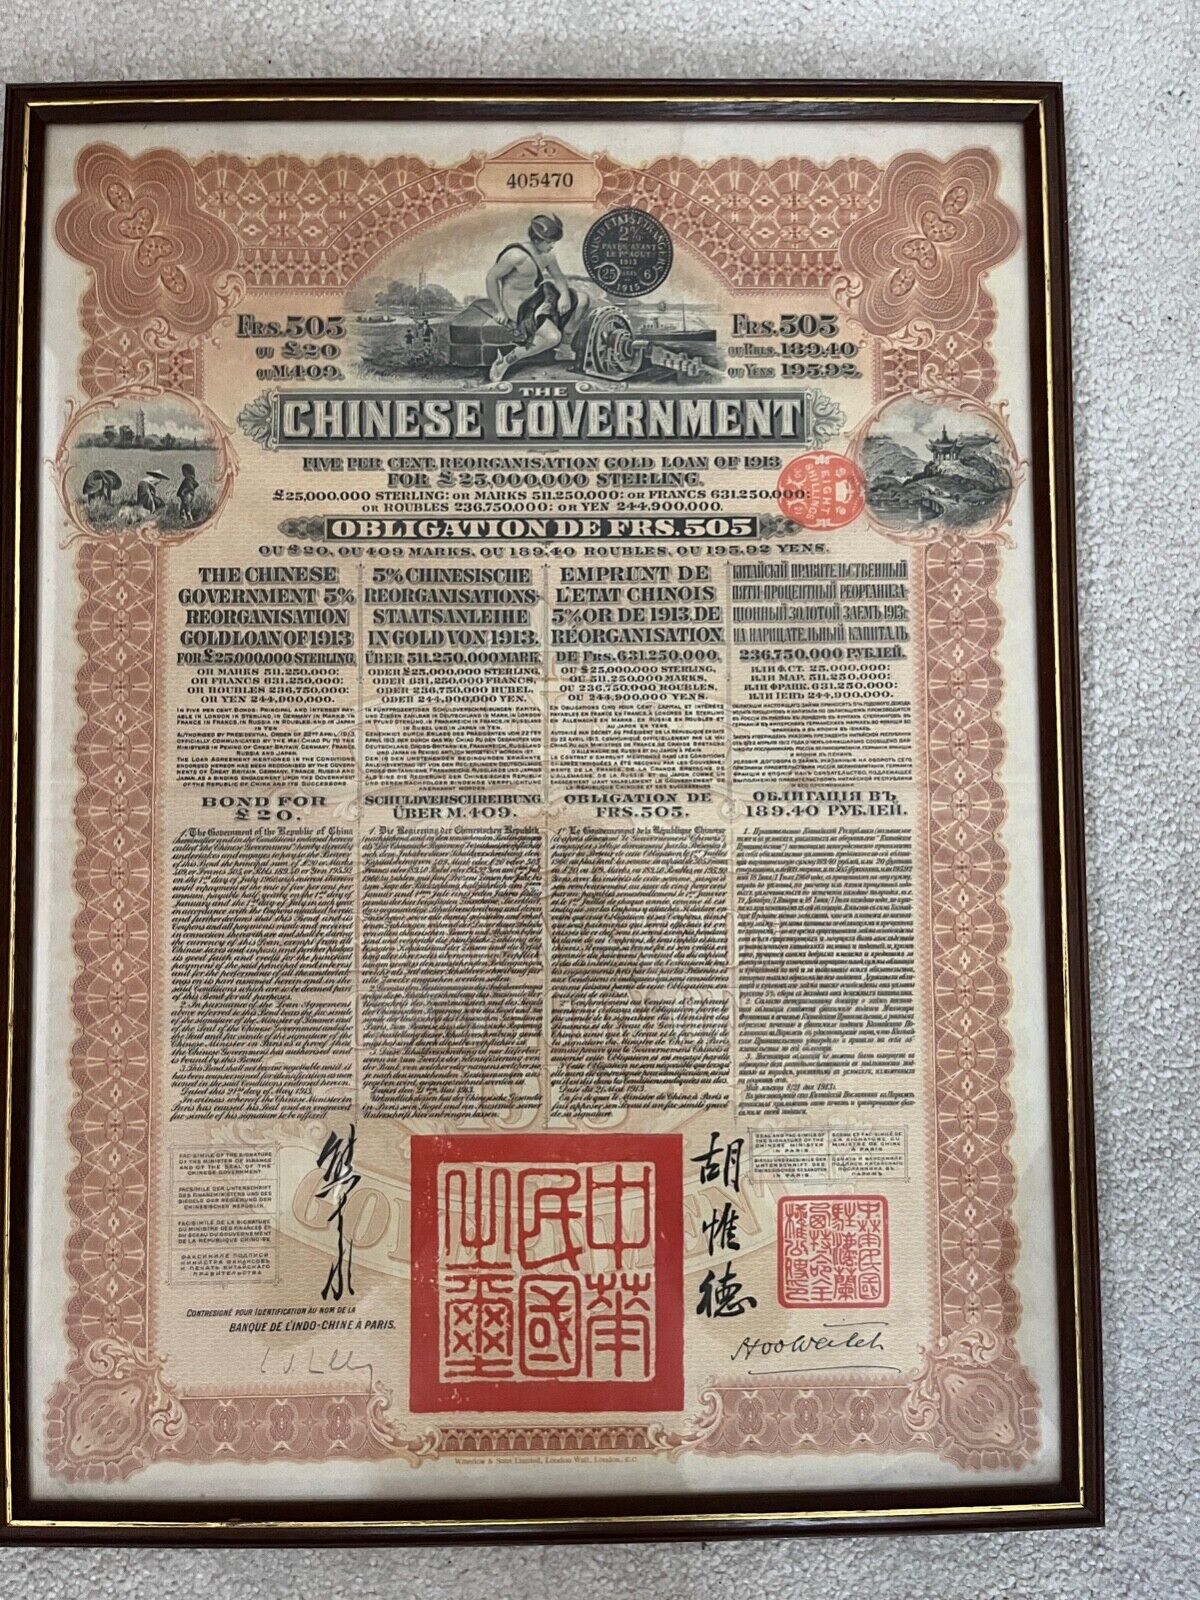 1913 CHINESE Government £20 Bond 5% Reorganisation Gold Loan No. 405470  Framed